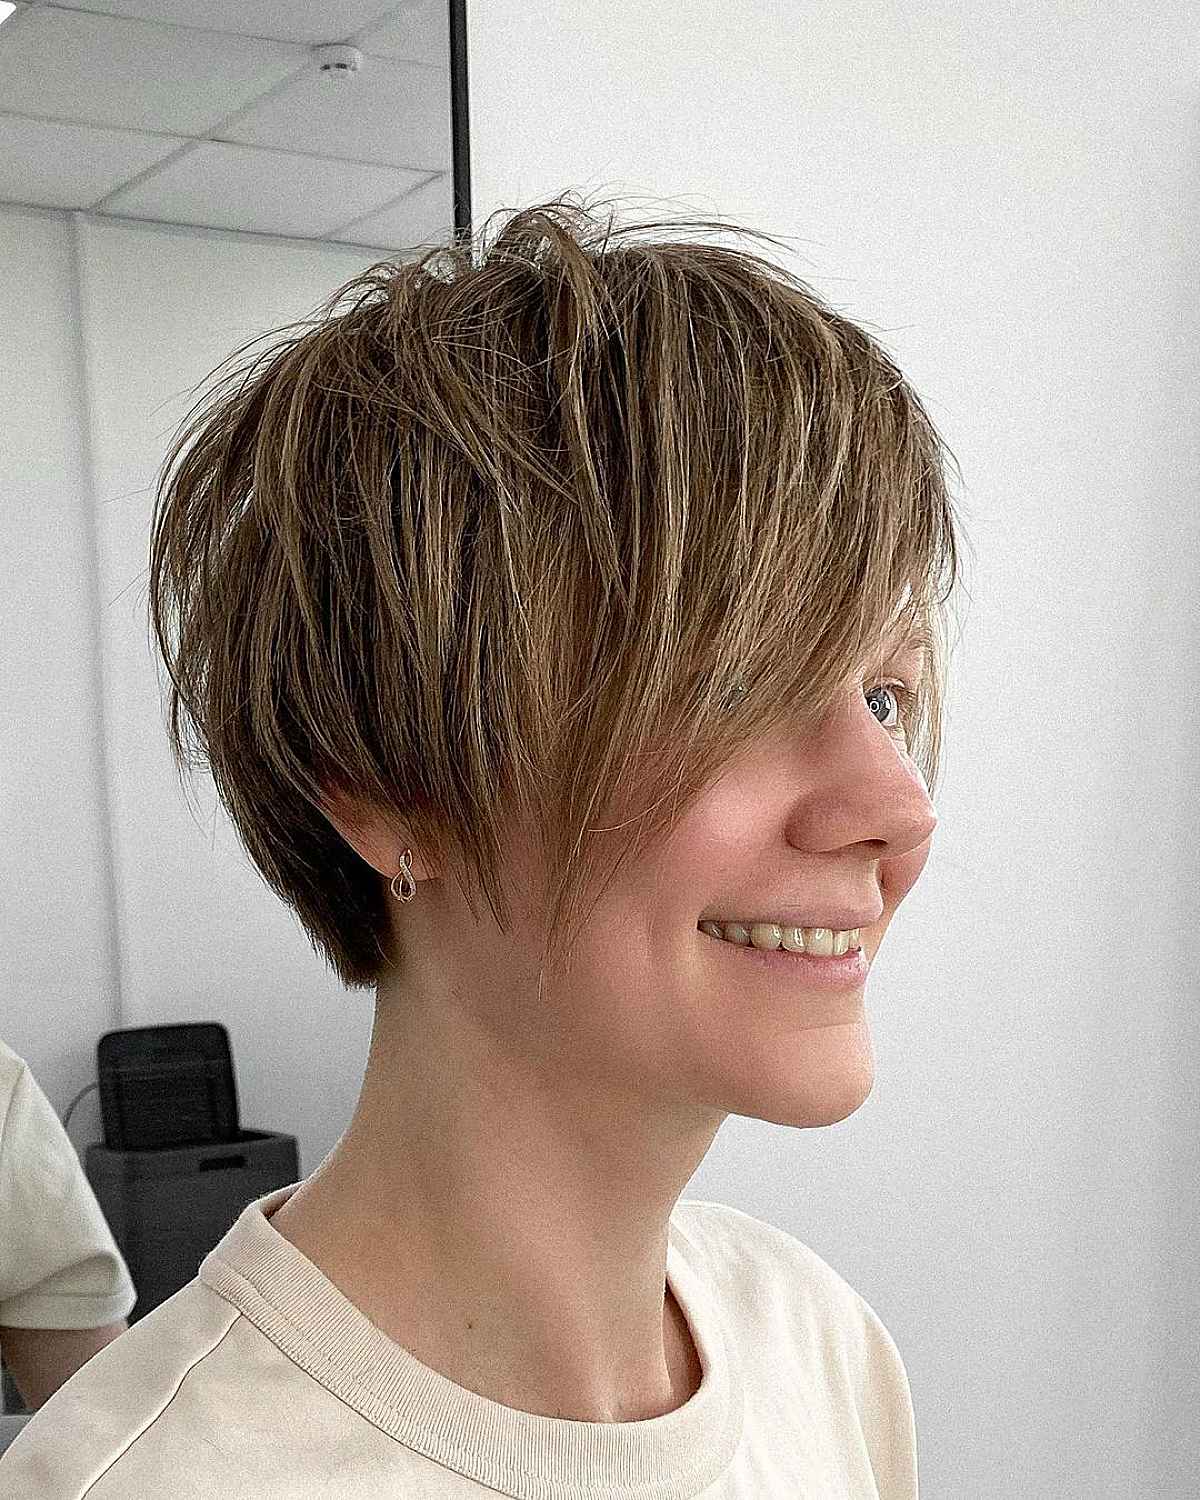 Long Pixie Cut with Bangs hairstyle for women